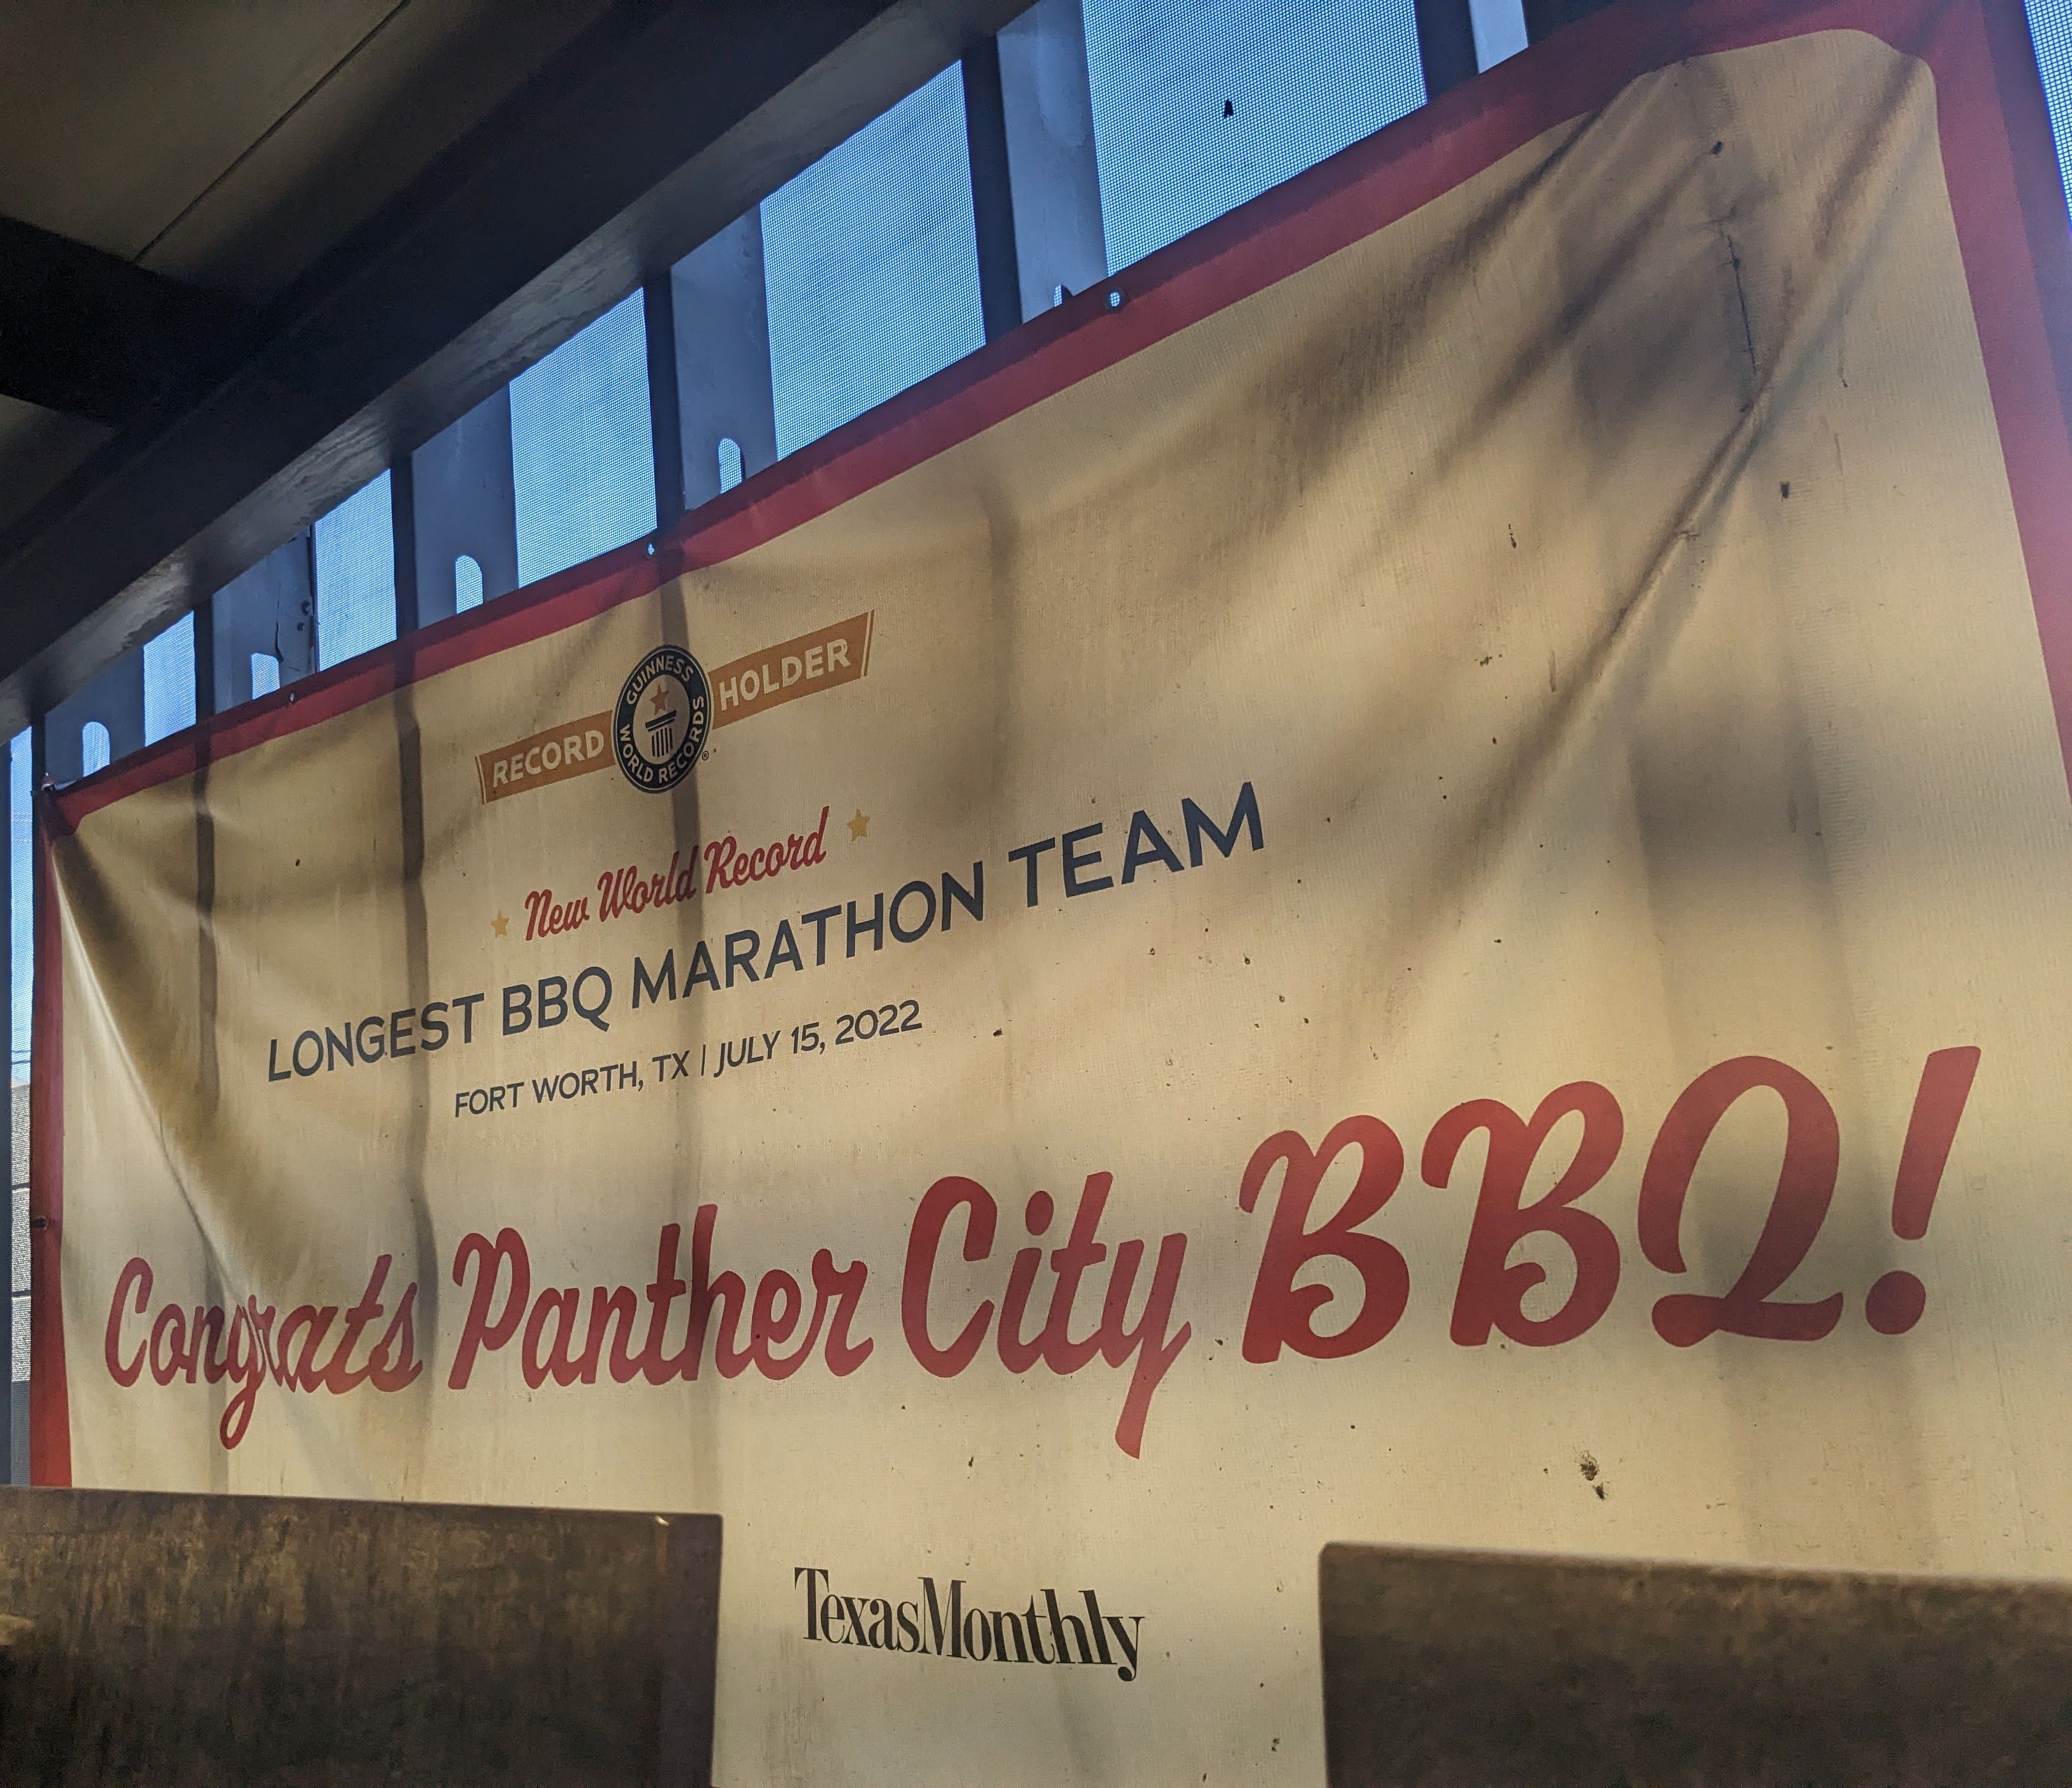 Panther City BBQ